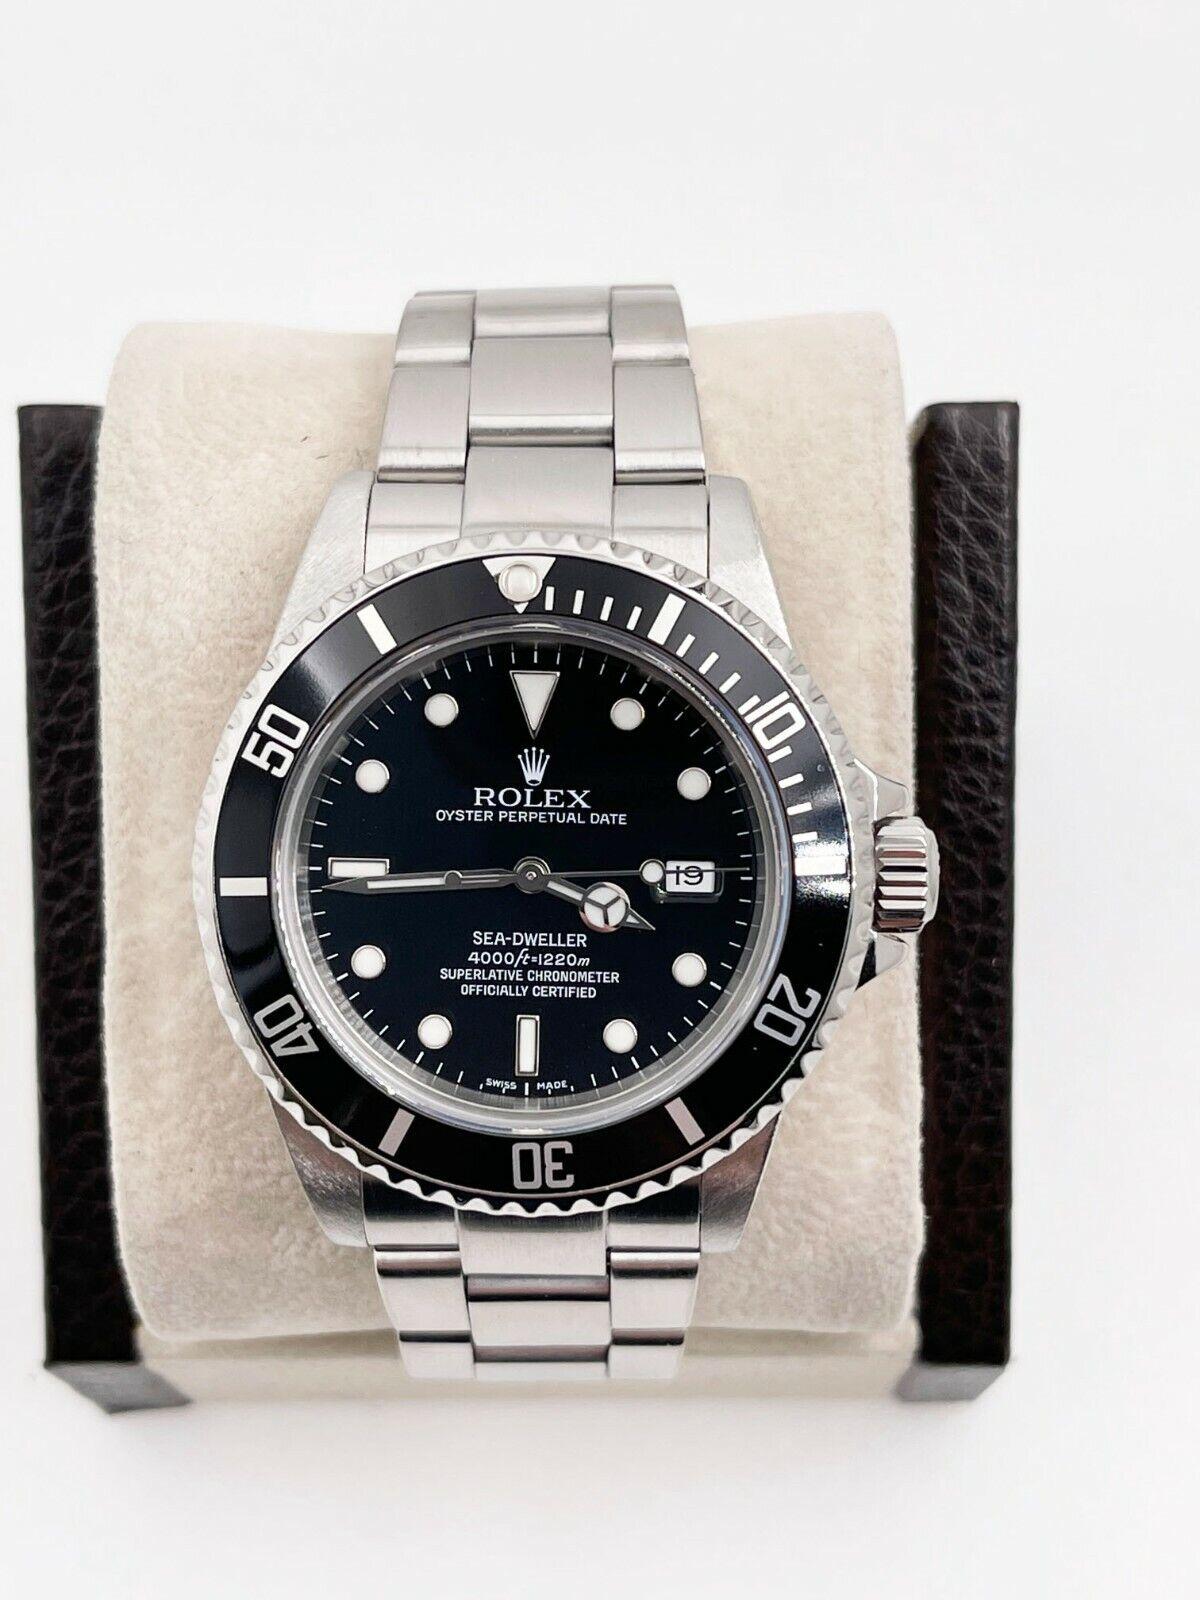 1984 Rolex Sea Dweller 16660 Black Dial Stainless Steel Box Service Paper 5